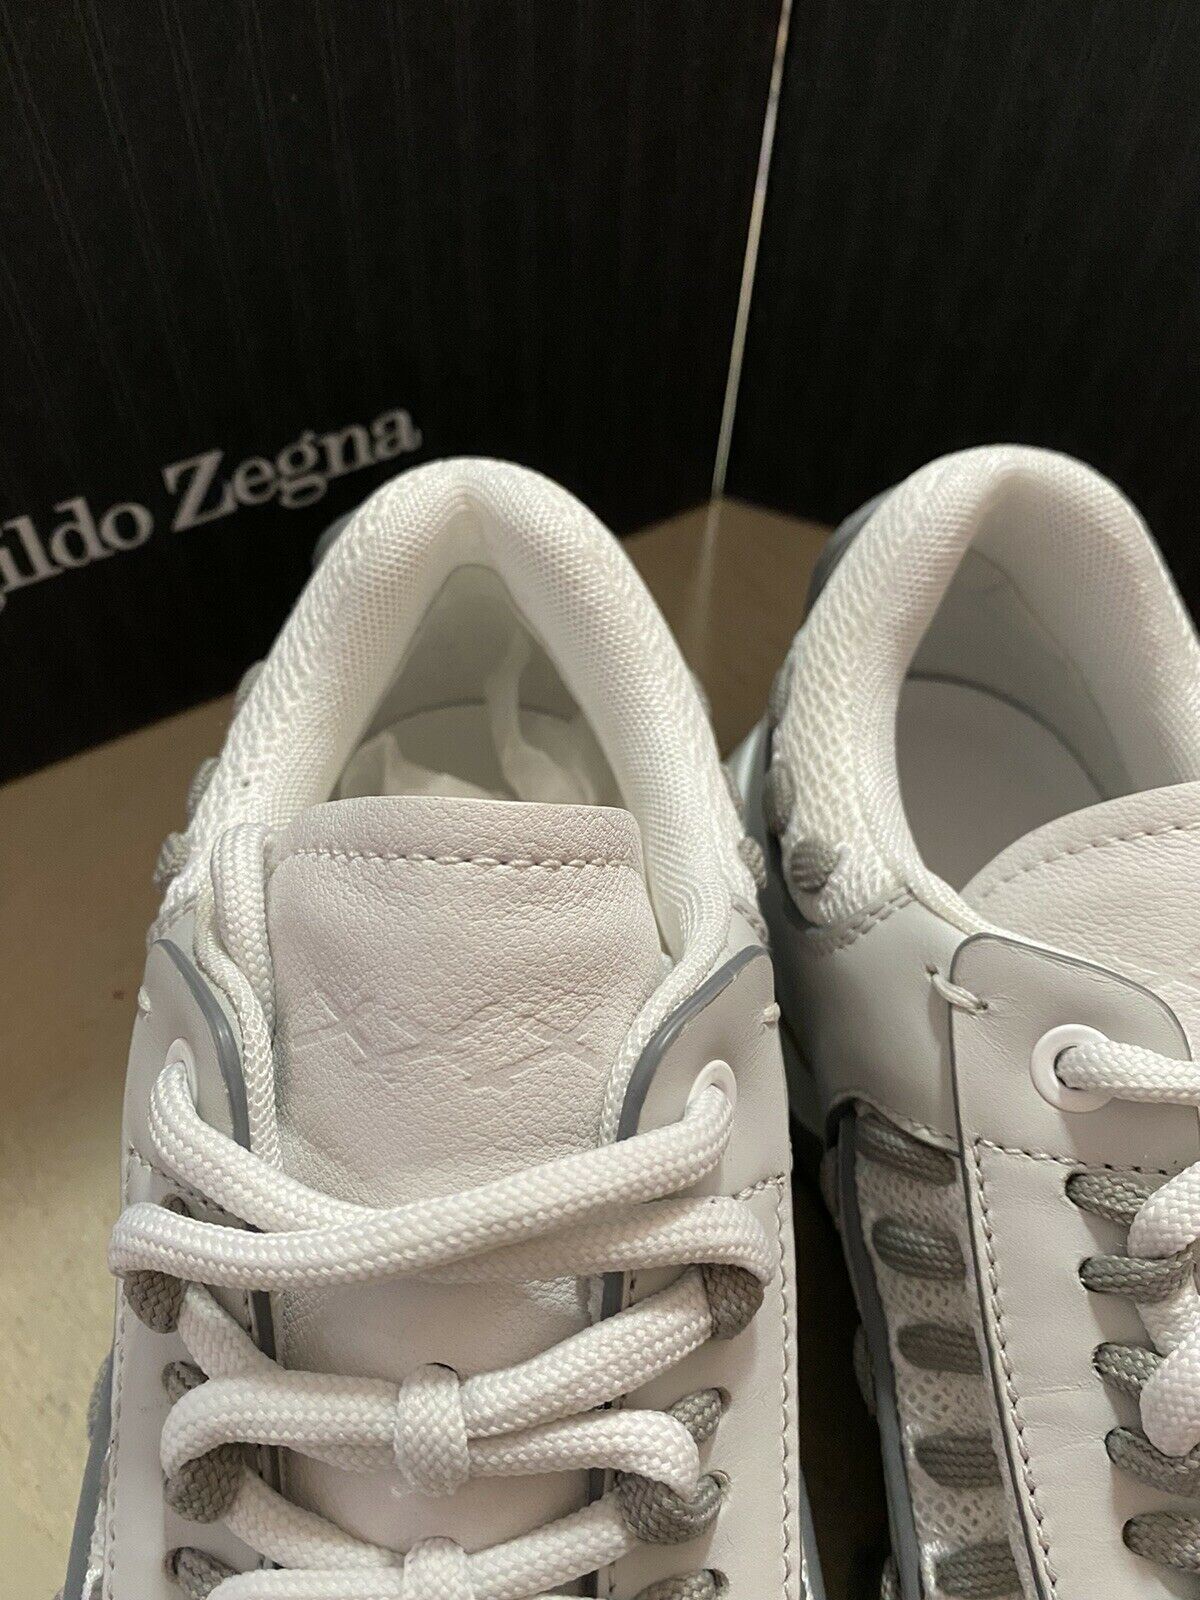 New $795 Ermenegildo Zegna Couture Leather Sneakers Shoes White/Gray 10 US Italy